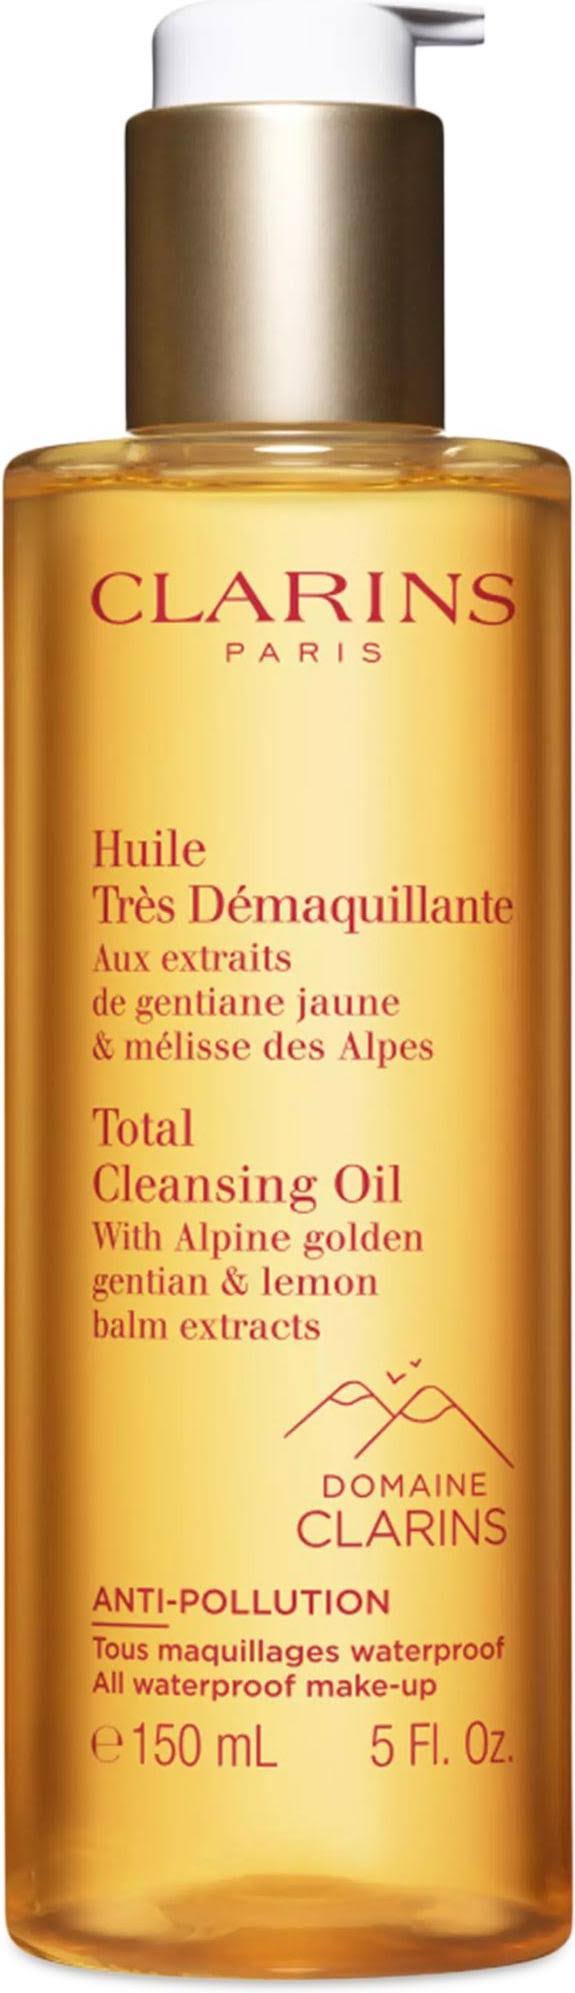 Clarins - Total Cleansing Oil - 5 oz.